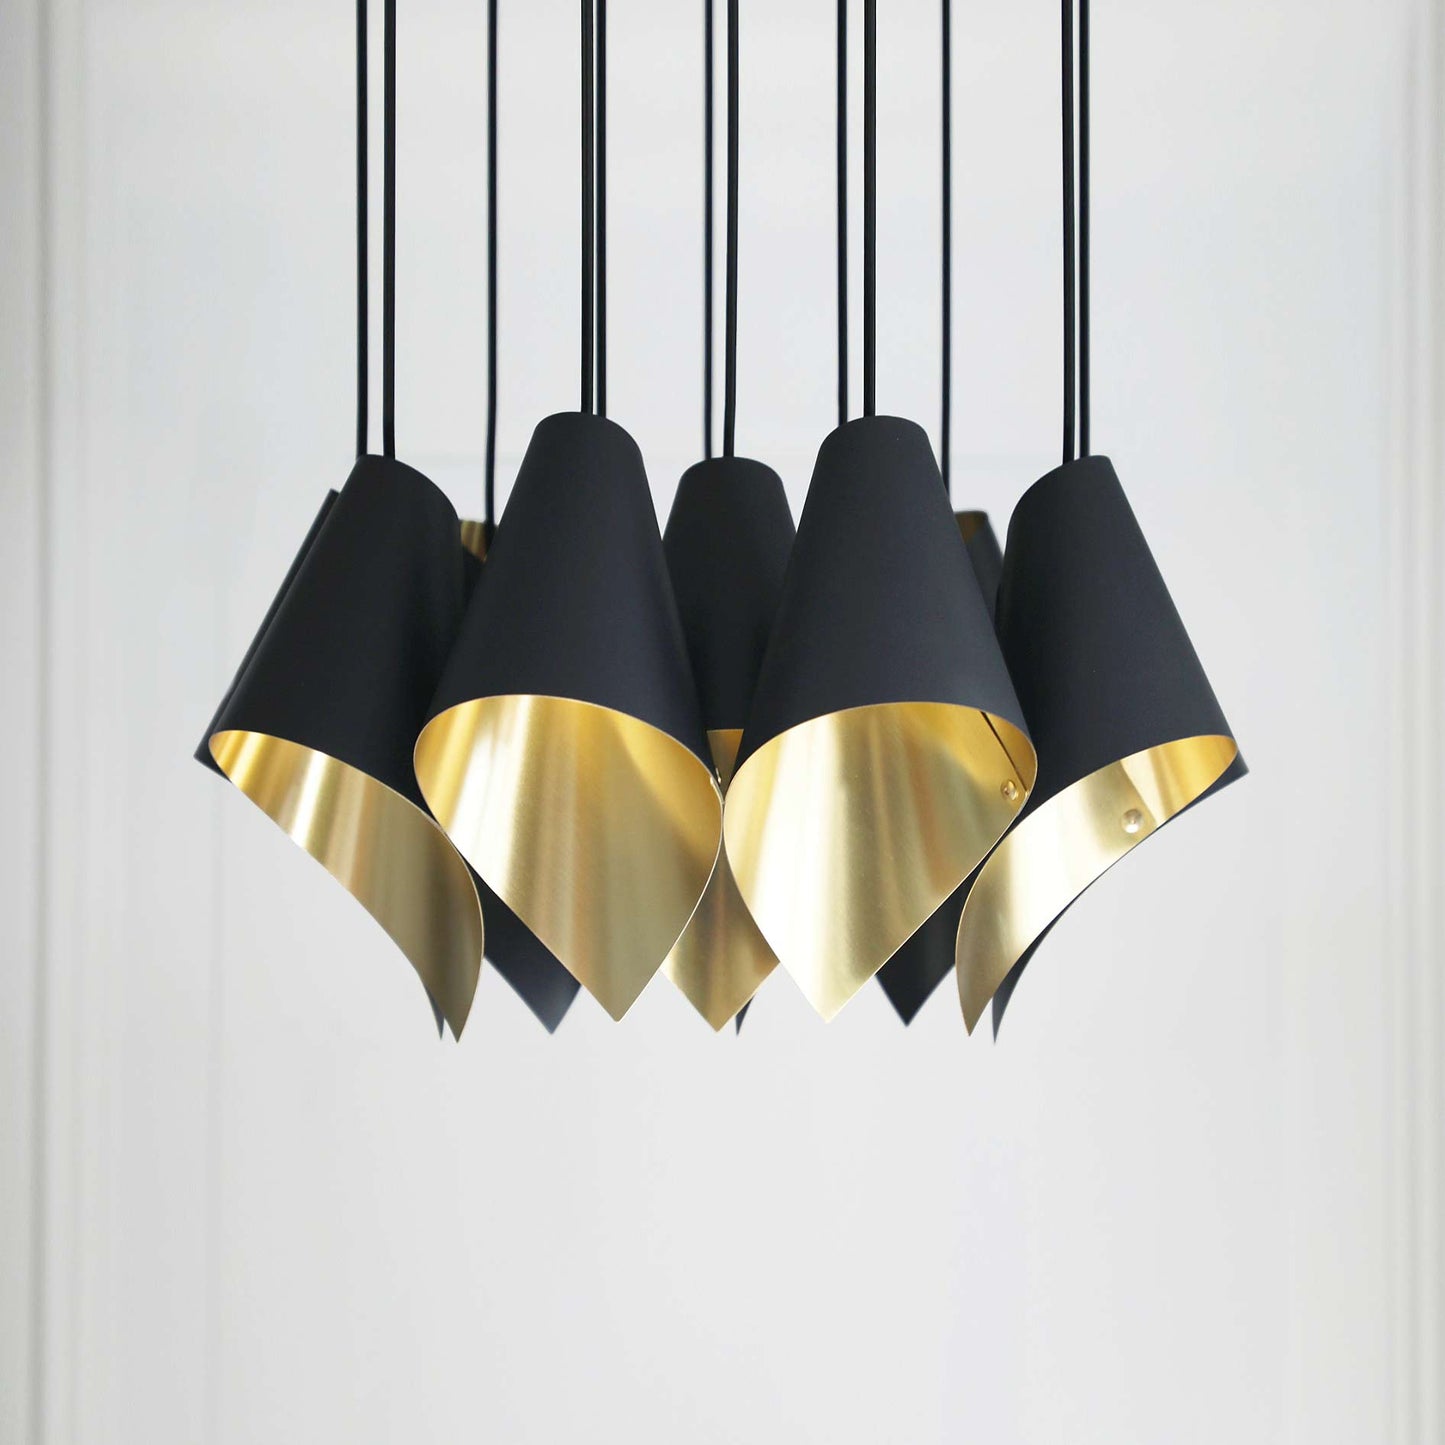 The Arcform ARC 12 modern chandelier in brushed brass is supplied by South Charlotte Fine Lighting and includes 12 contemporary lights in a cluster